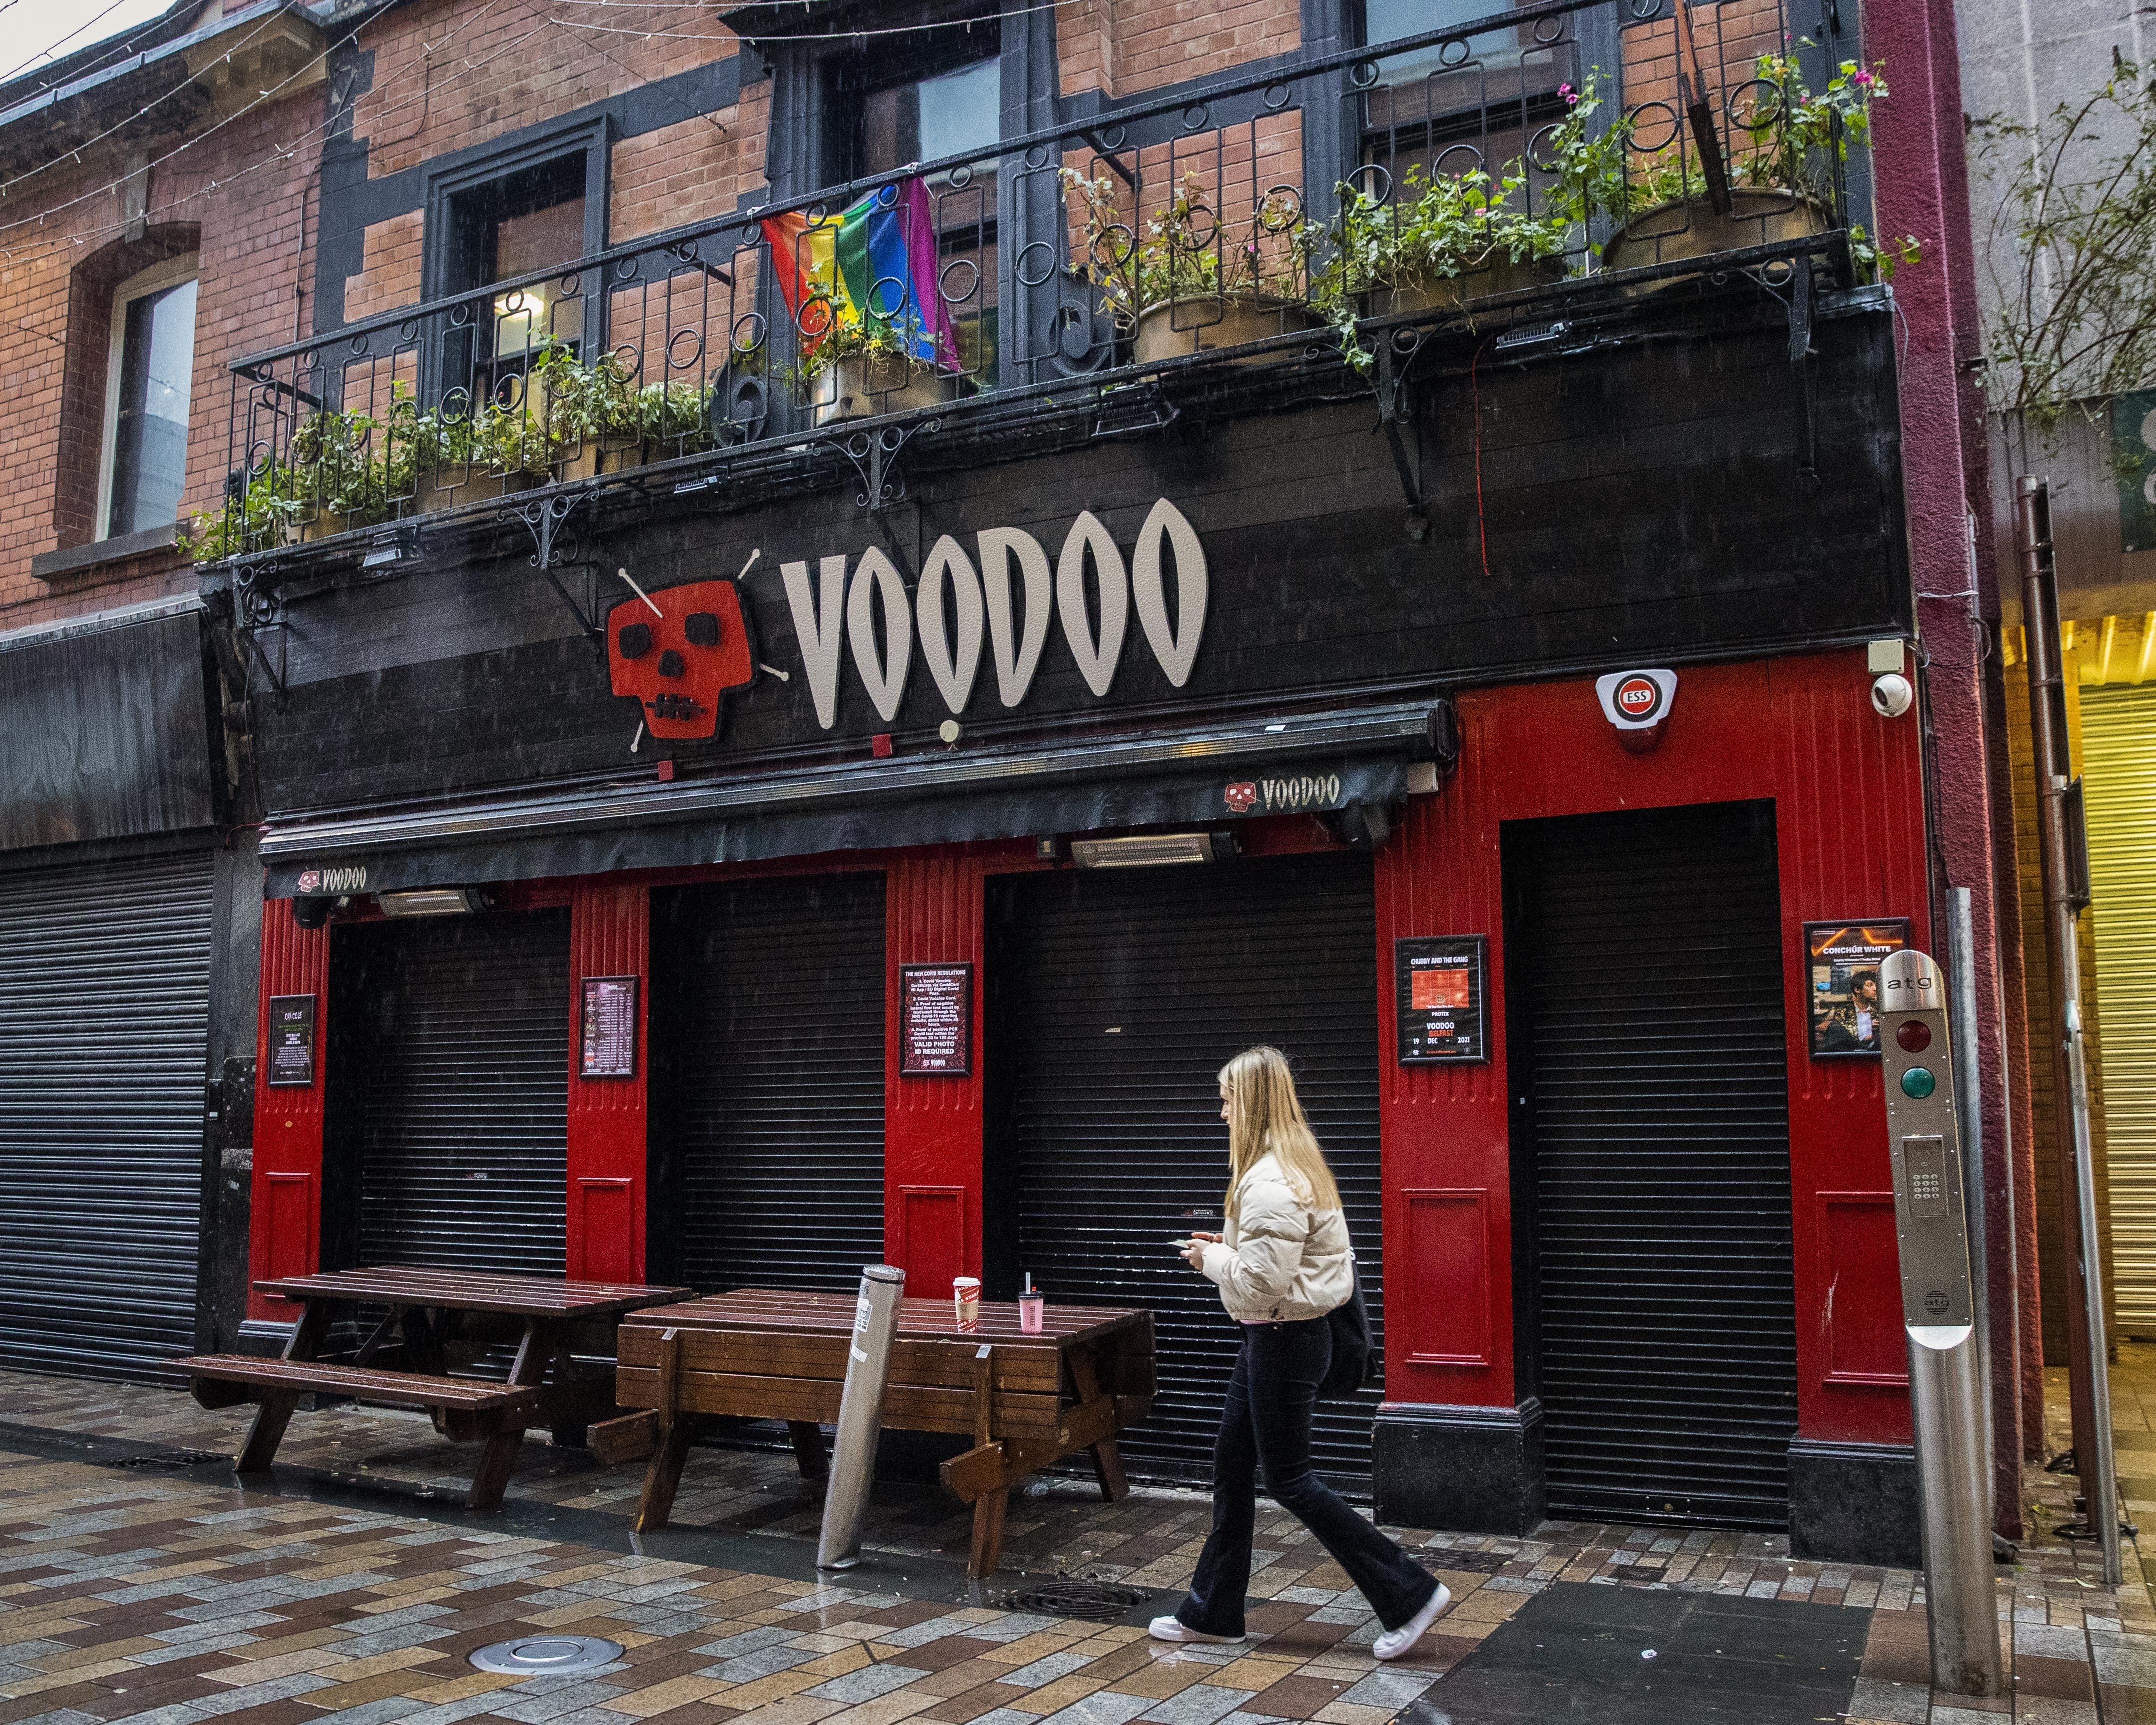 Closed Voodoo nightclub in Belfast. Owner’s of the popular nightclub took the decision to close until after Christmas posting a message on their Facebook account.